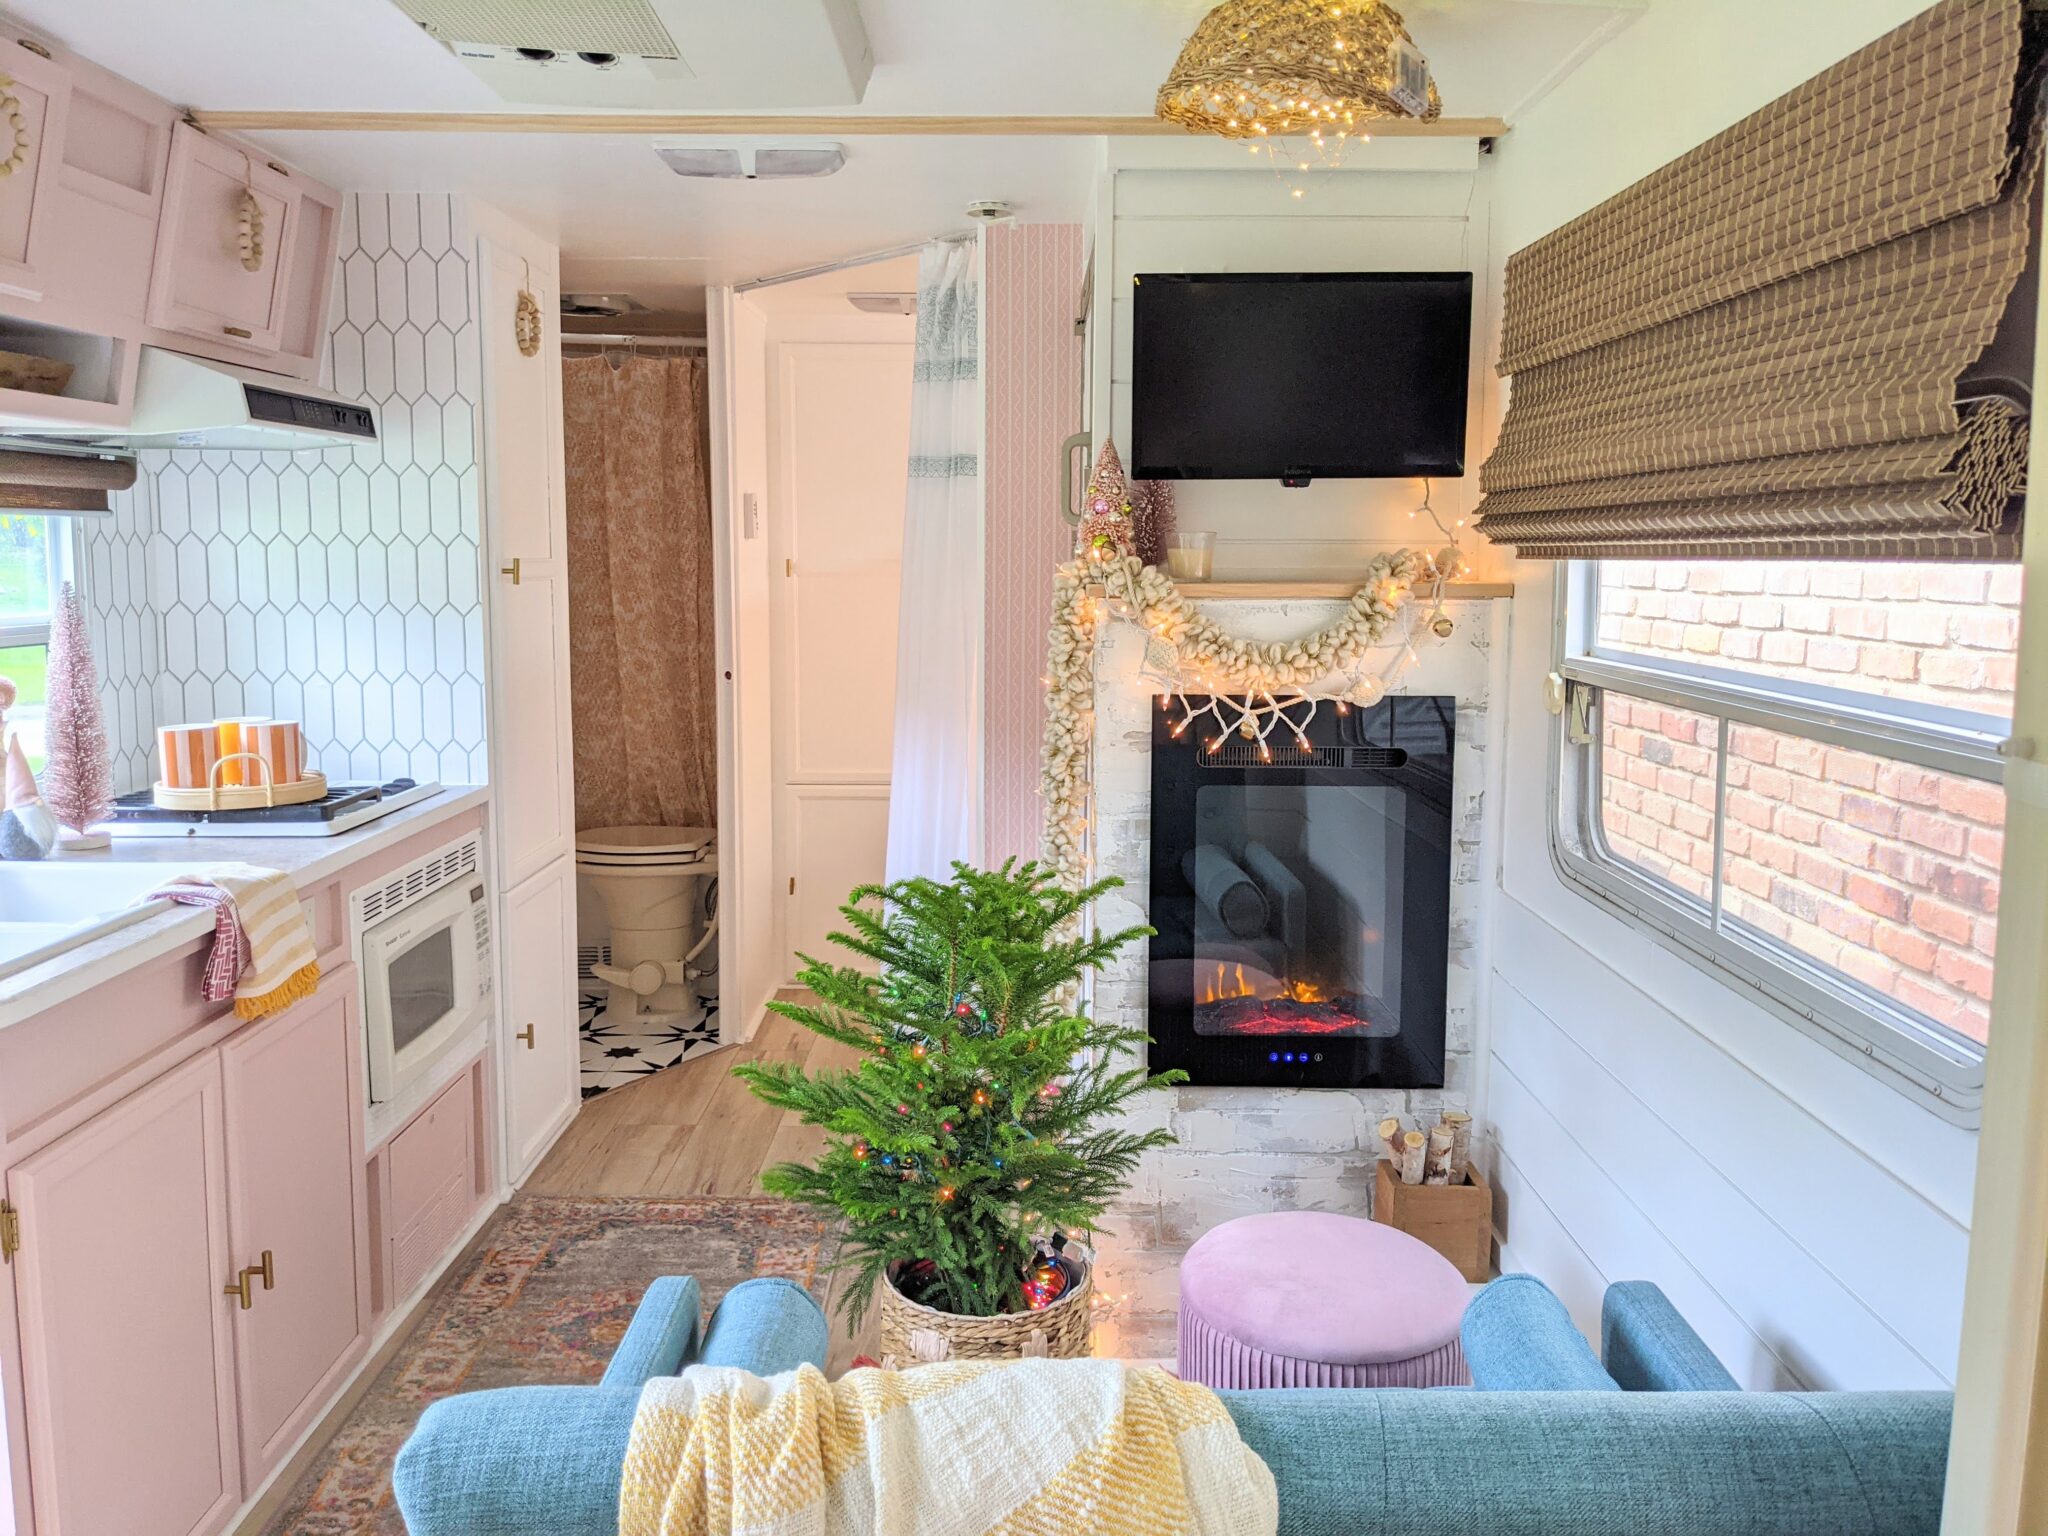 Colorful and Fun Christmas Decorations in the Renovated Camper All Things with Purpose Sarah Lemp 8